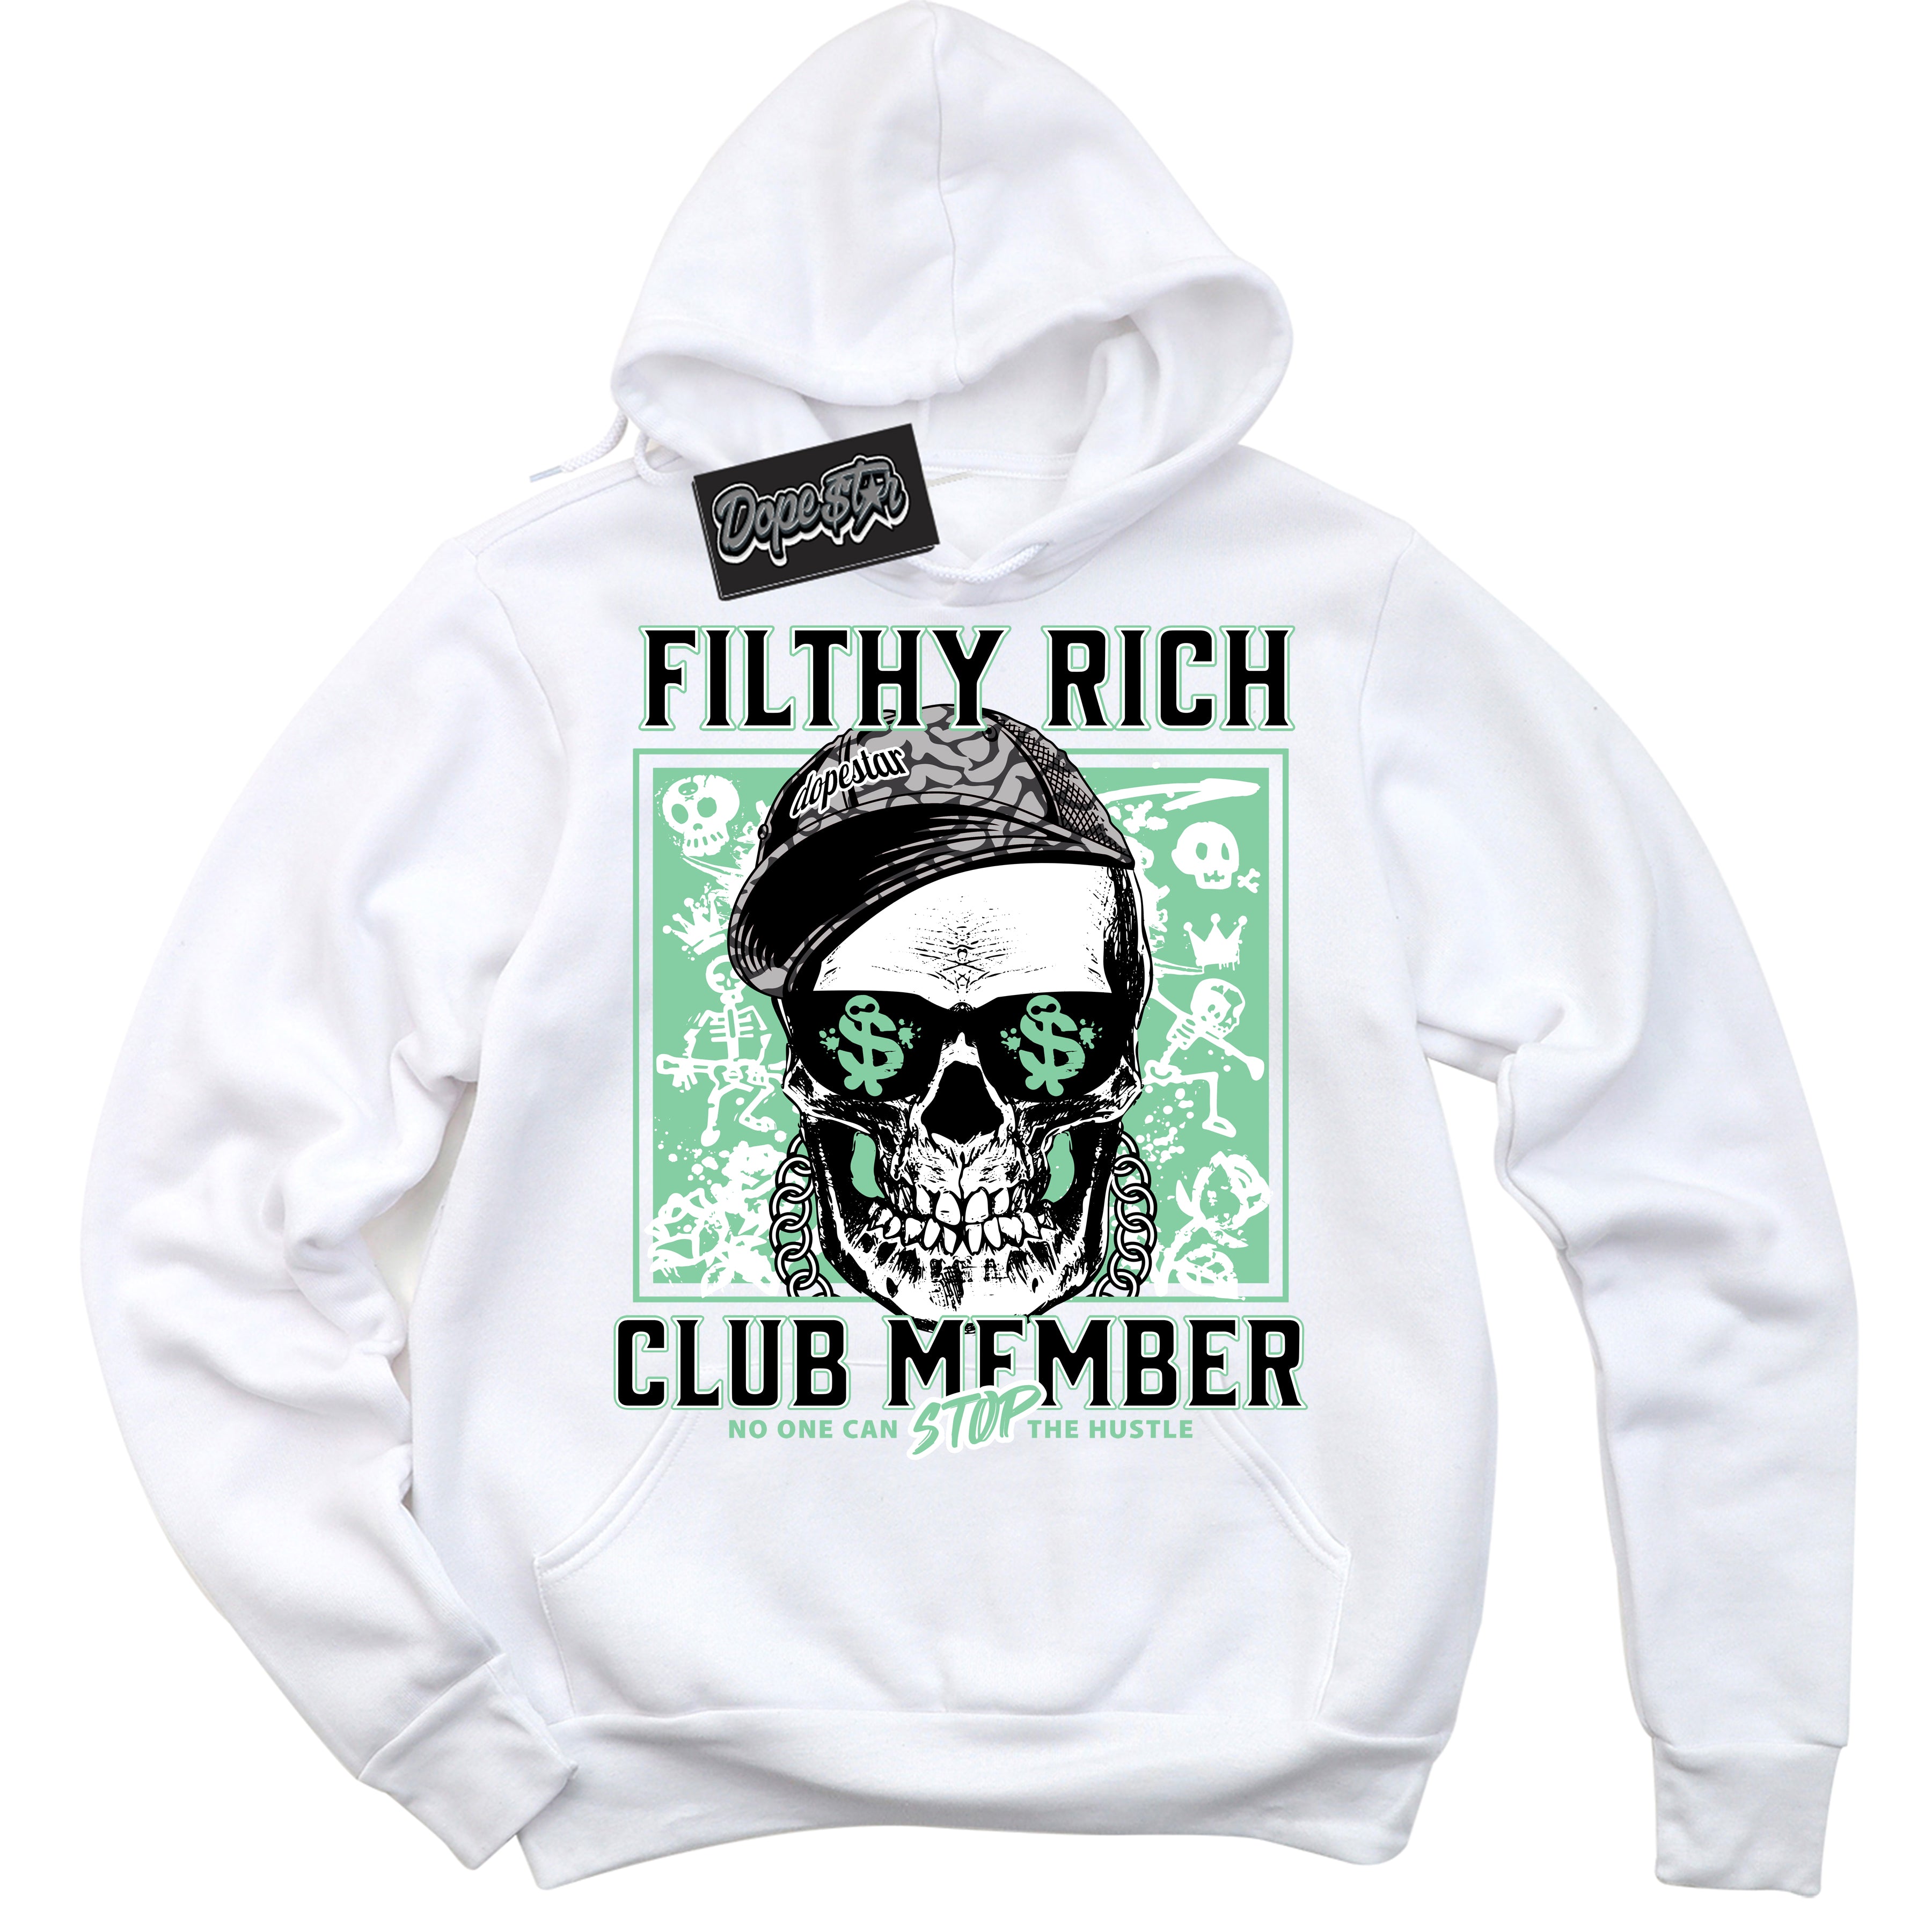 Cool White Hoodie with “ Filthy Rich ”  design that Perfectly Matches Green Glow 3s Sneakers.